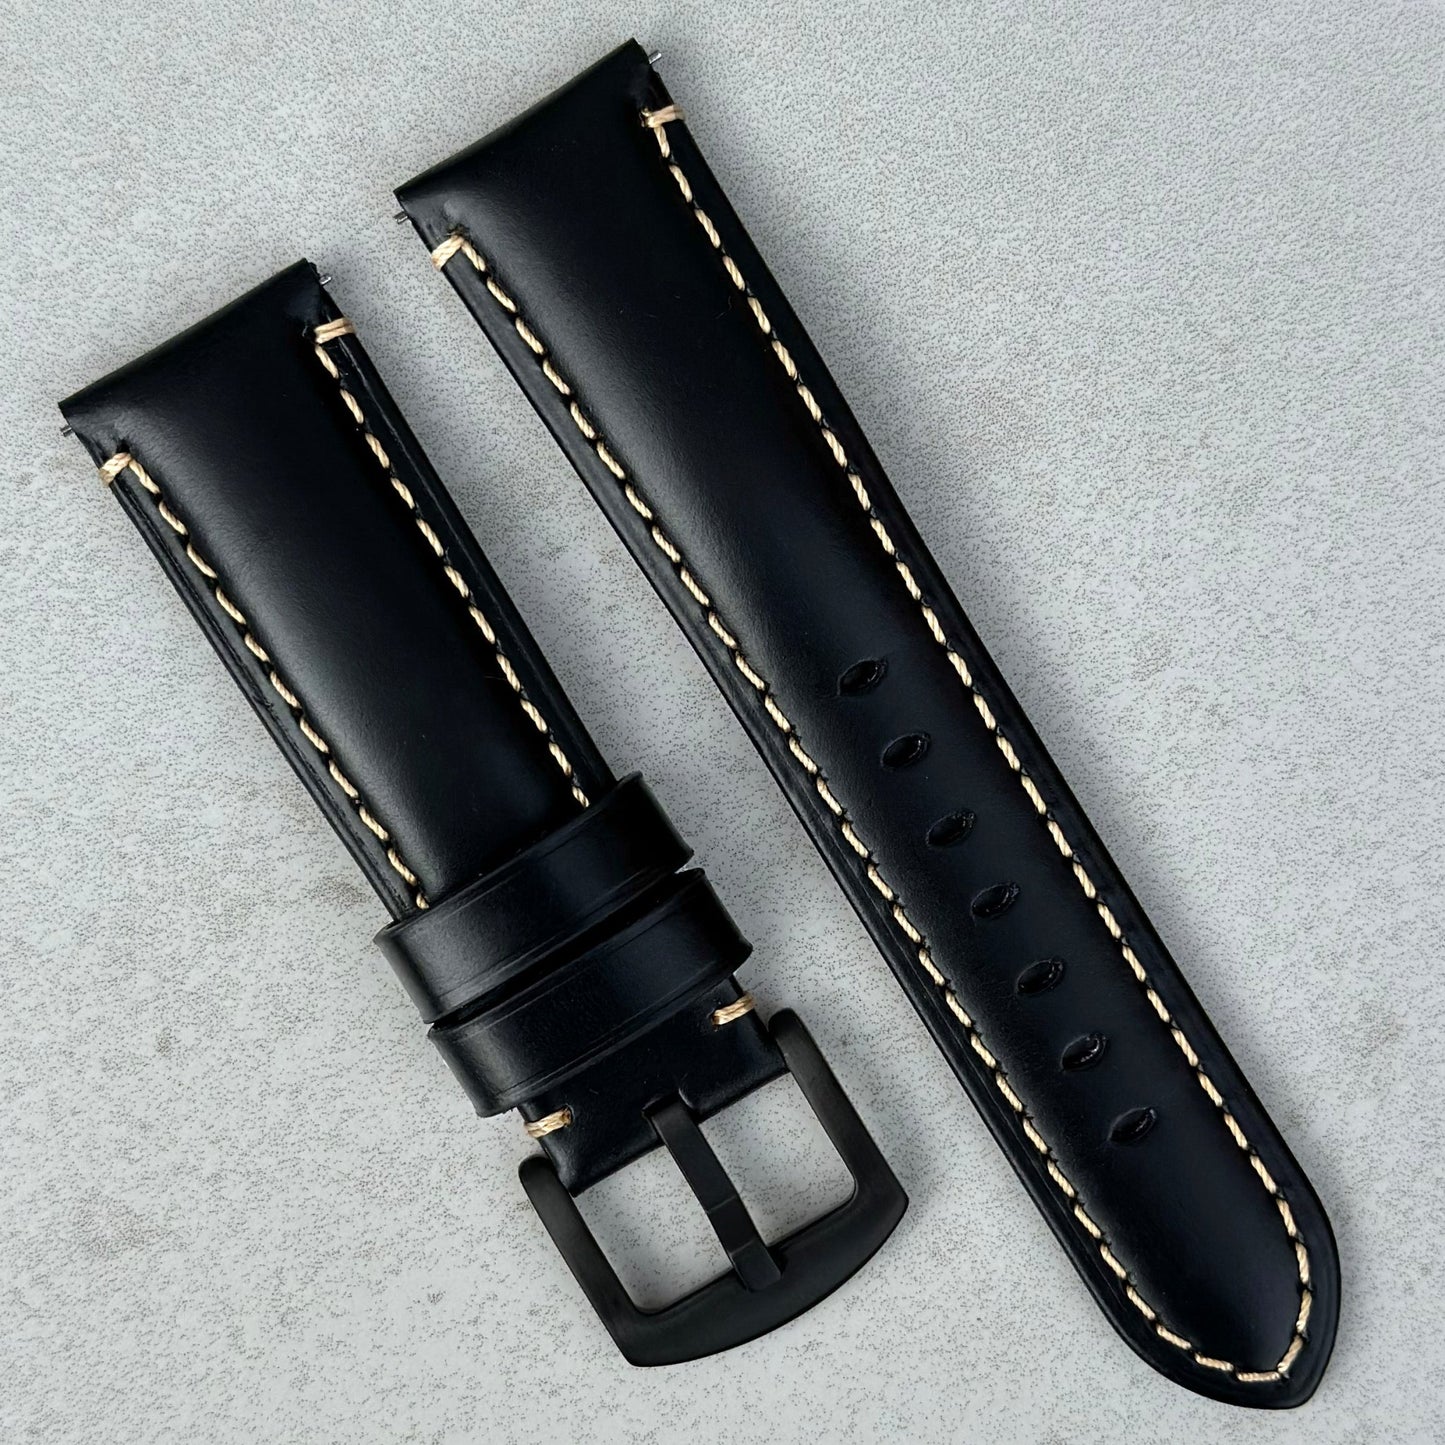 Oslo black full grain leather watch strap with contrast ivory stitching. PVD Black stainless steel buckle. 18mm, 20mm, 22mm